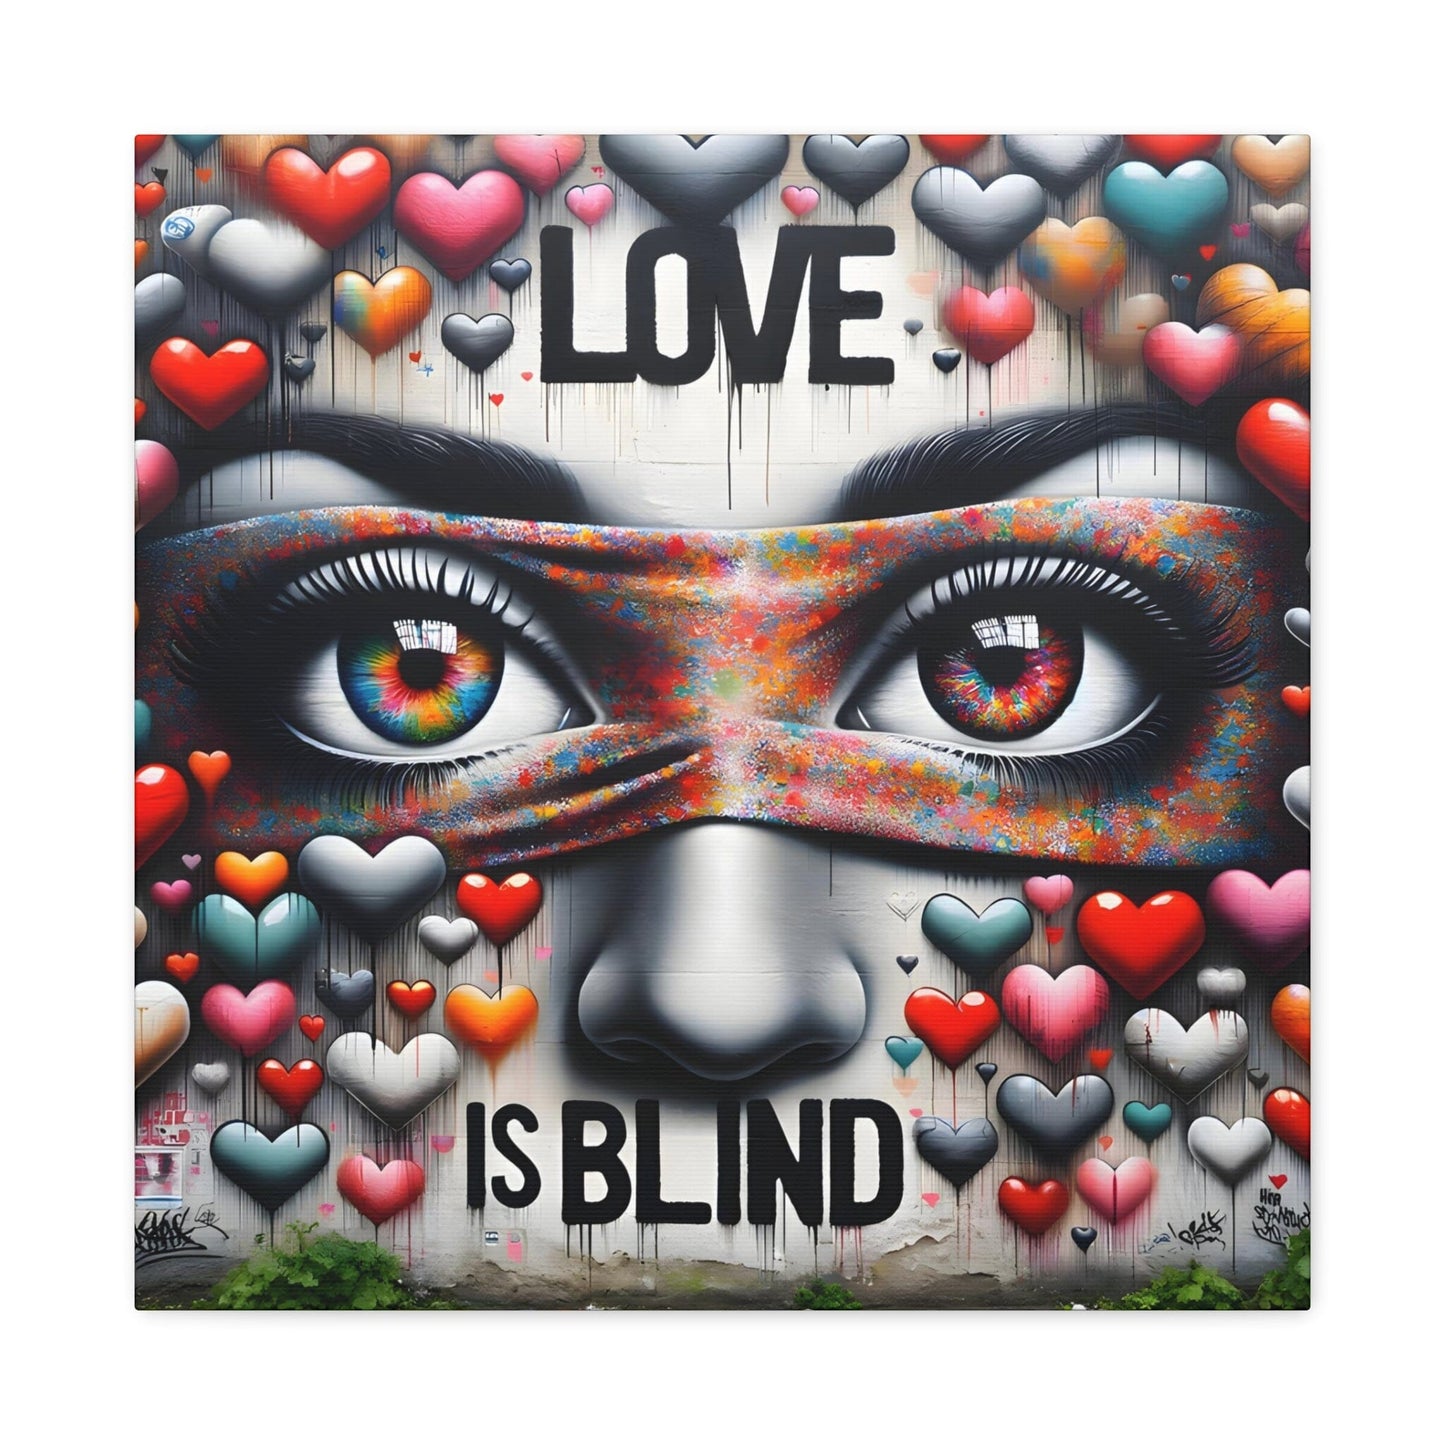 Image 3 Colors of Unity’ by Alexi Hartwell, featuring faces adorned with pride colors merging on a textured urban canvas, centered around the bold statement ‘Love is Blind’